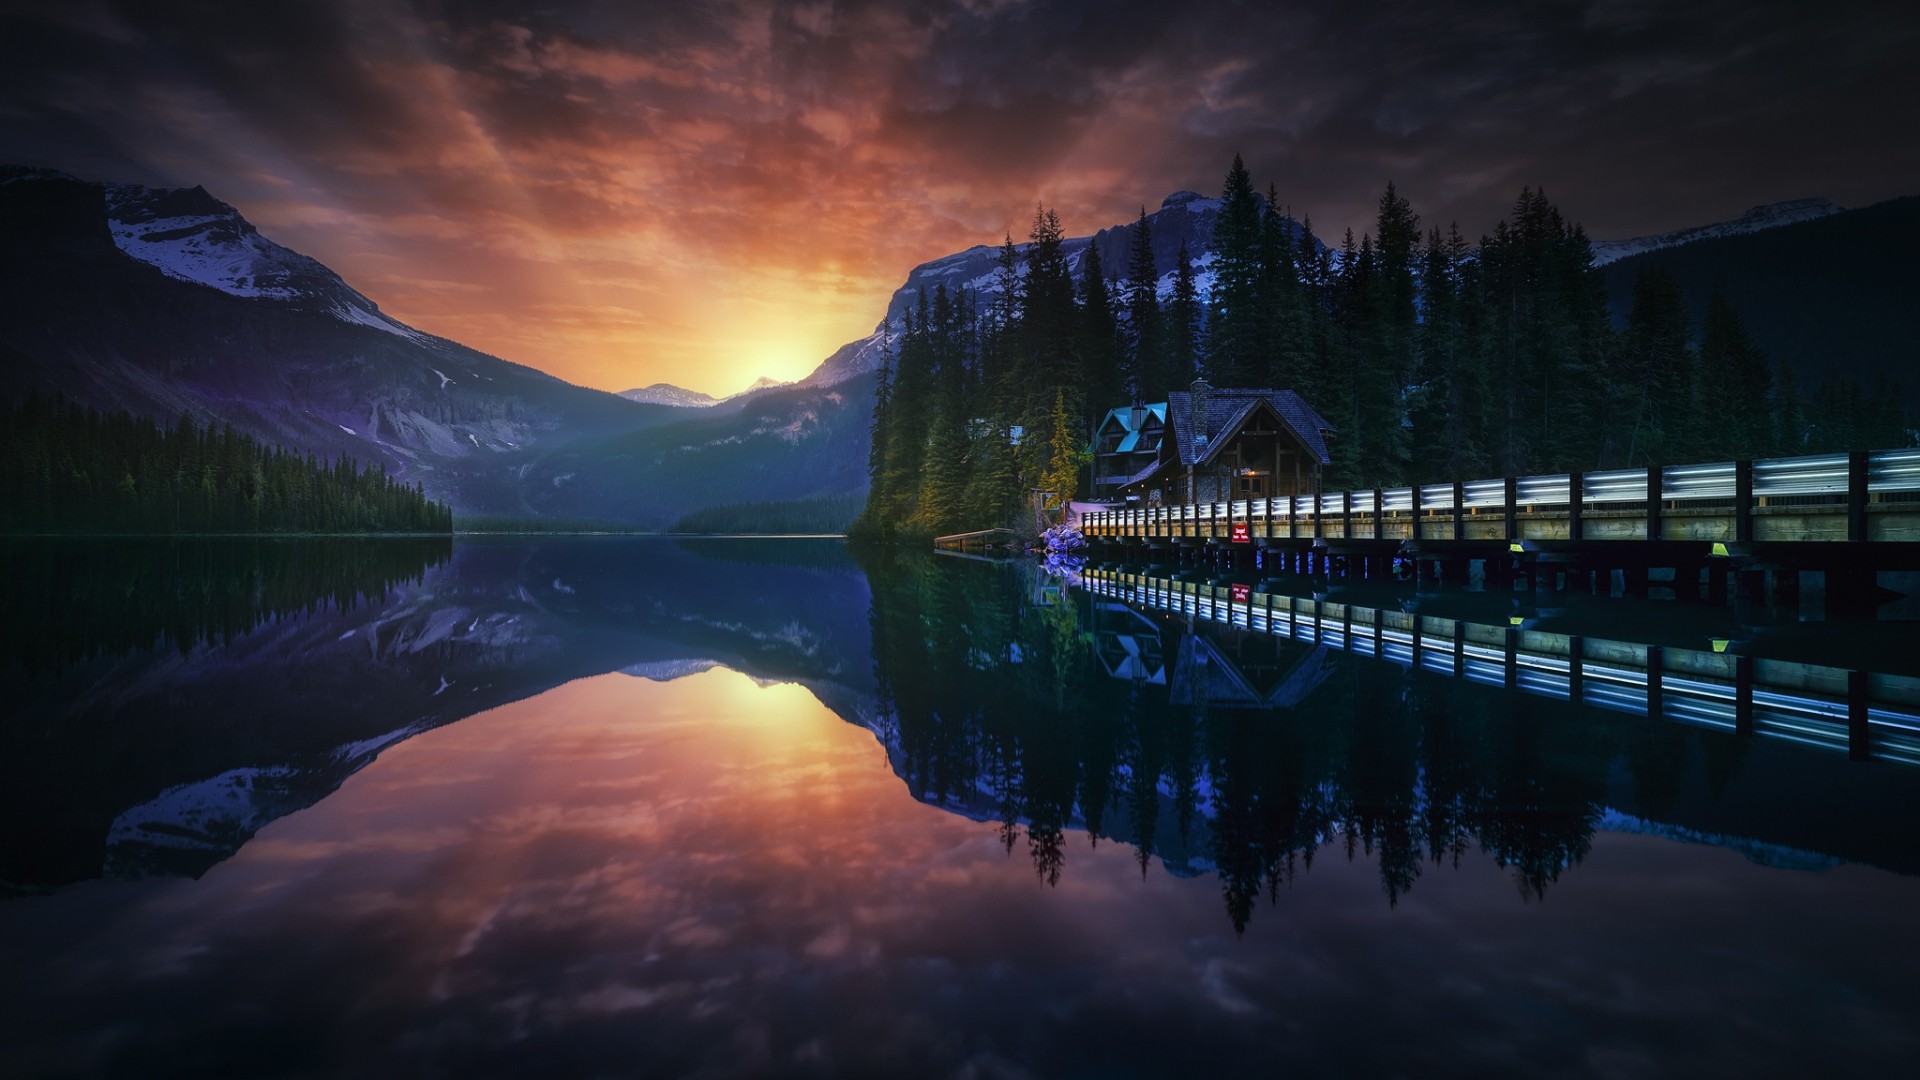 Architecture Building Evening Snowy Peak Water Lake Forest Sunset Reflection Pier House Winter Rocky 1920x1080